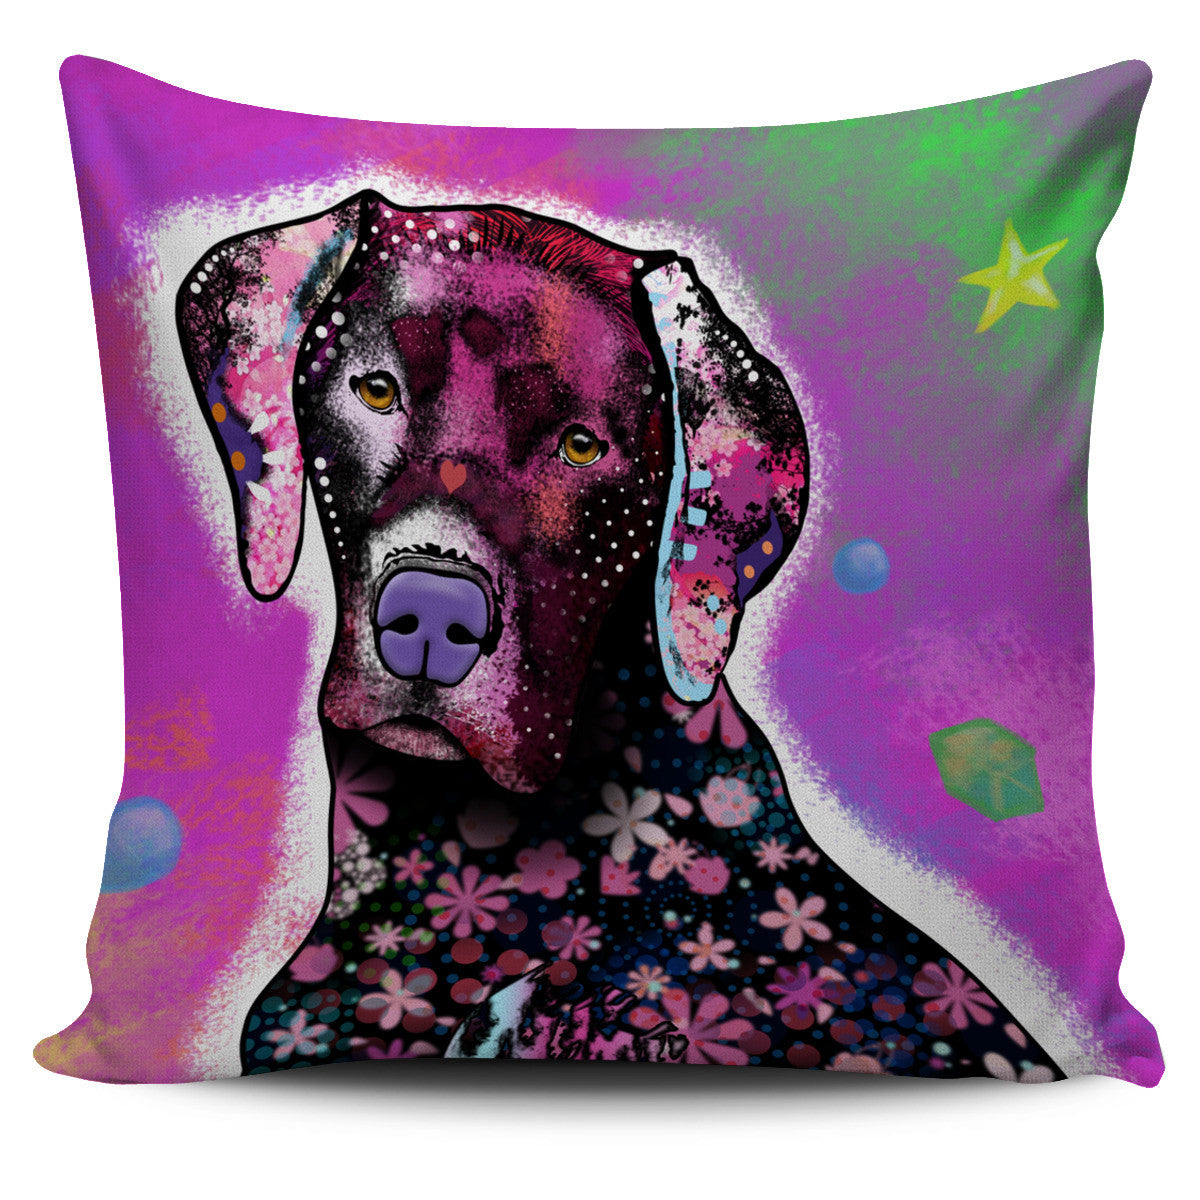 Lab Puppy Pillow Covers - Hello Moa